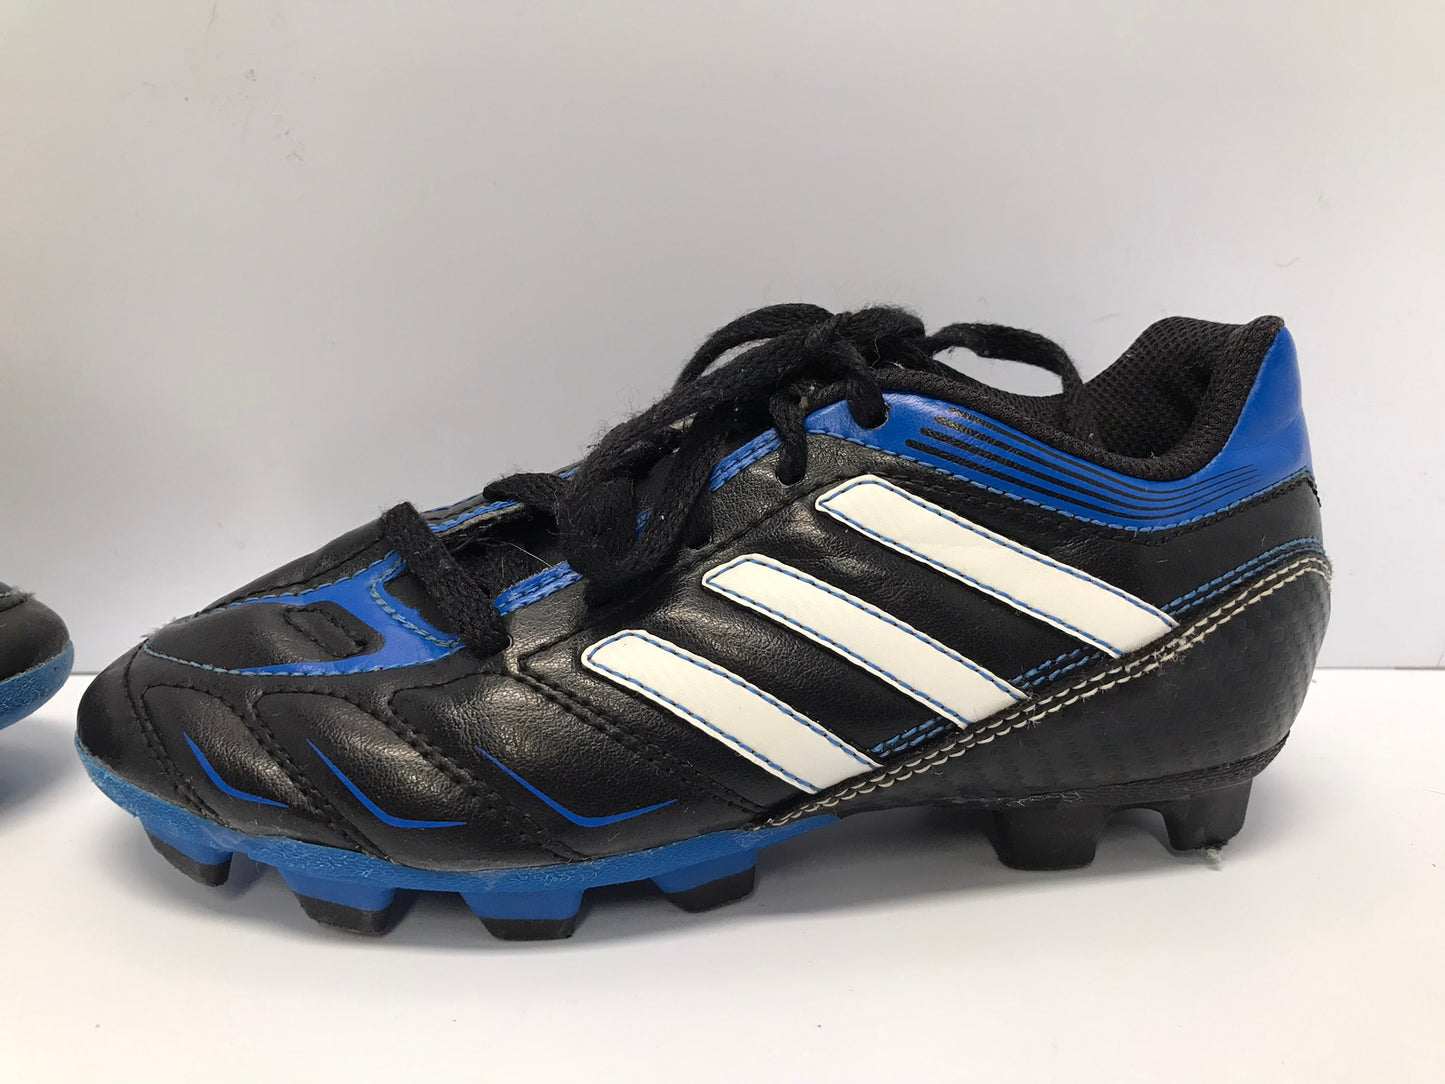 Soccer Shoes Cleats Child Size 1 Adidas Black Blue White